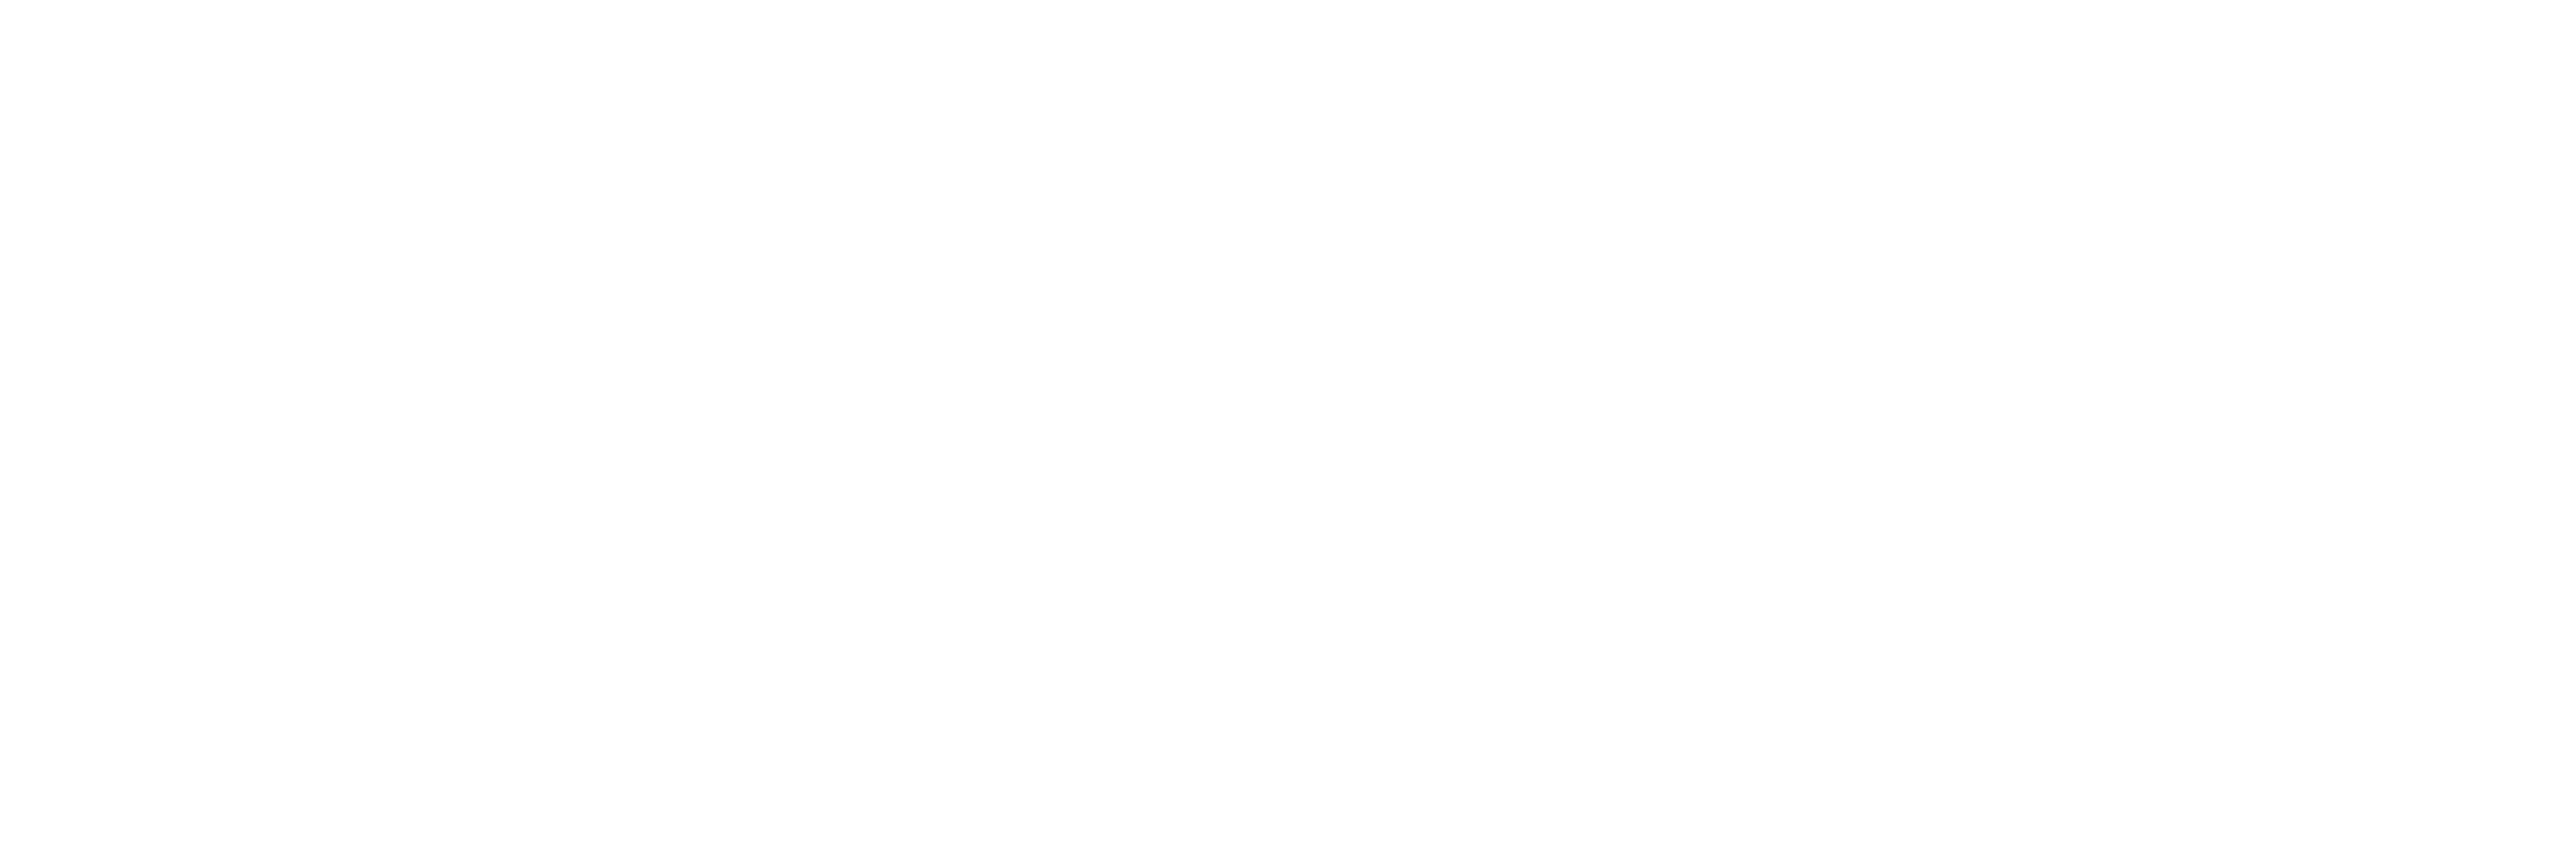 The Remarkabrand Podcast